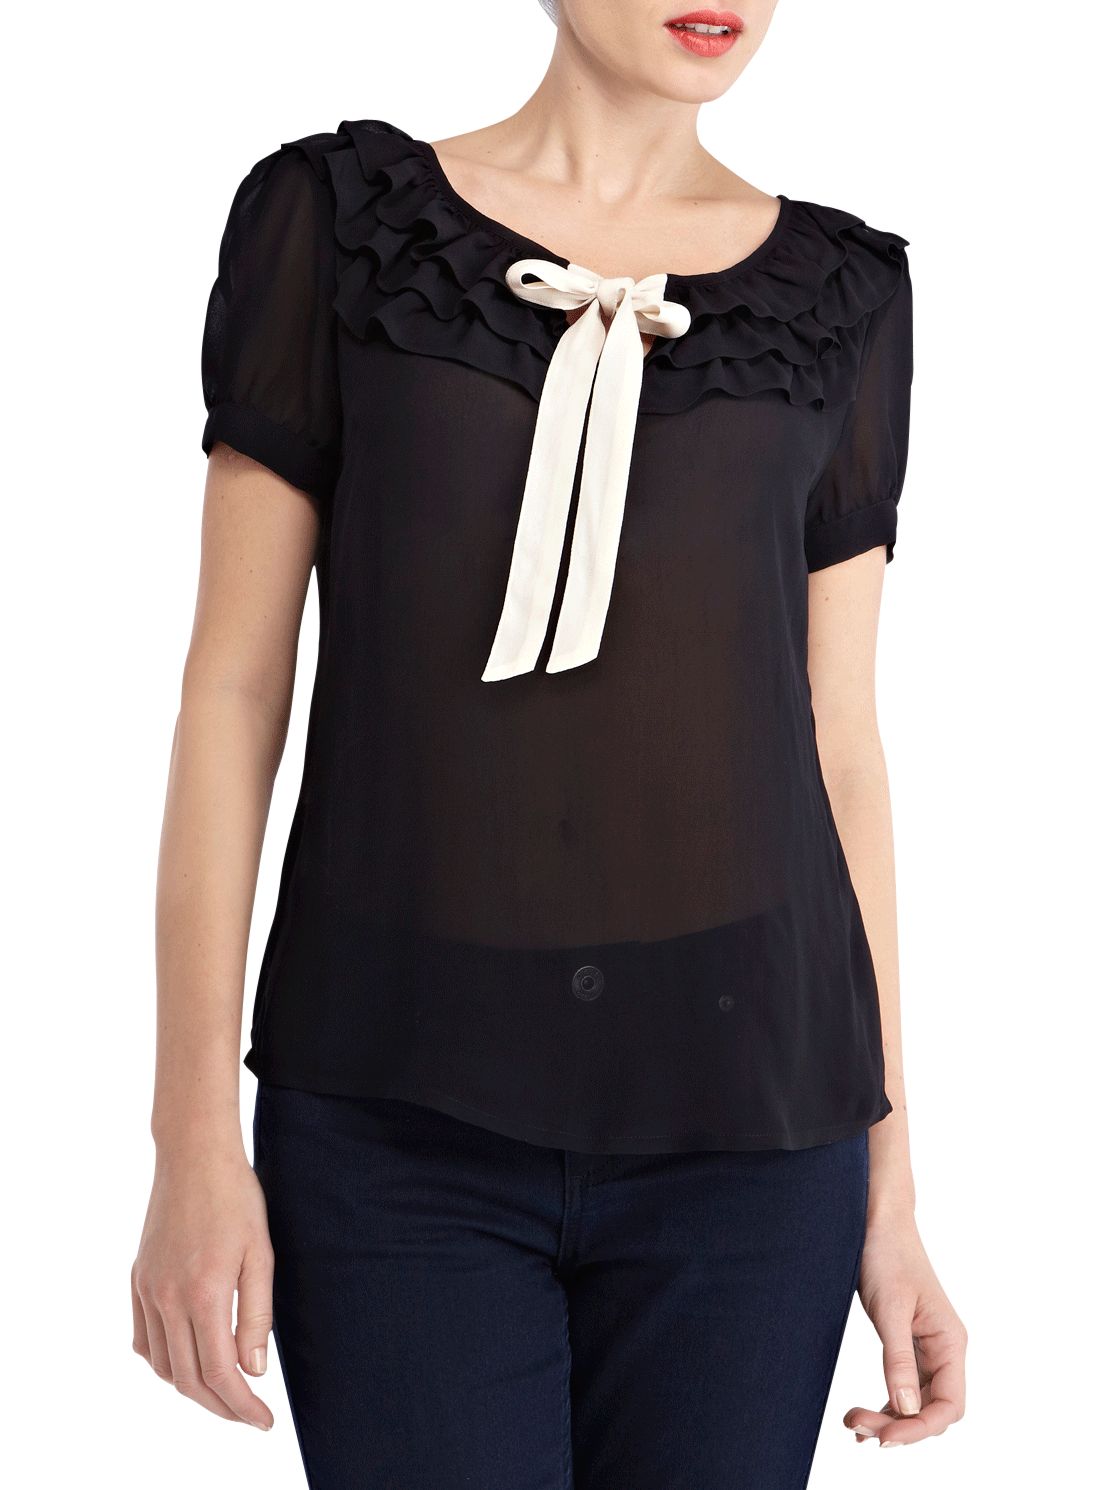 Oasis Dandy Frill Pussy Bow Blouse, Black